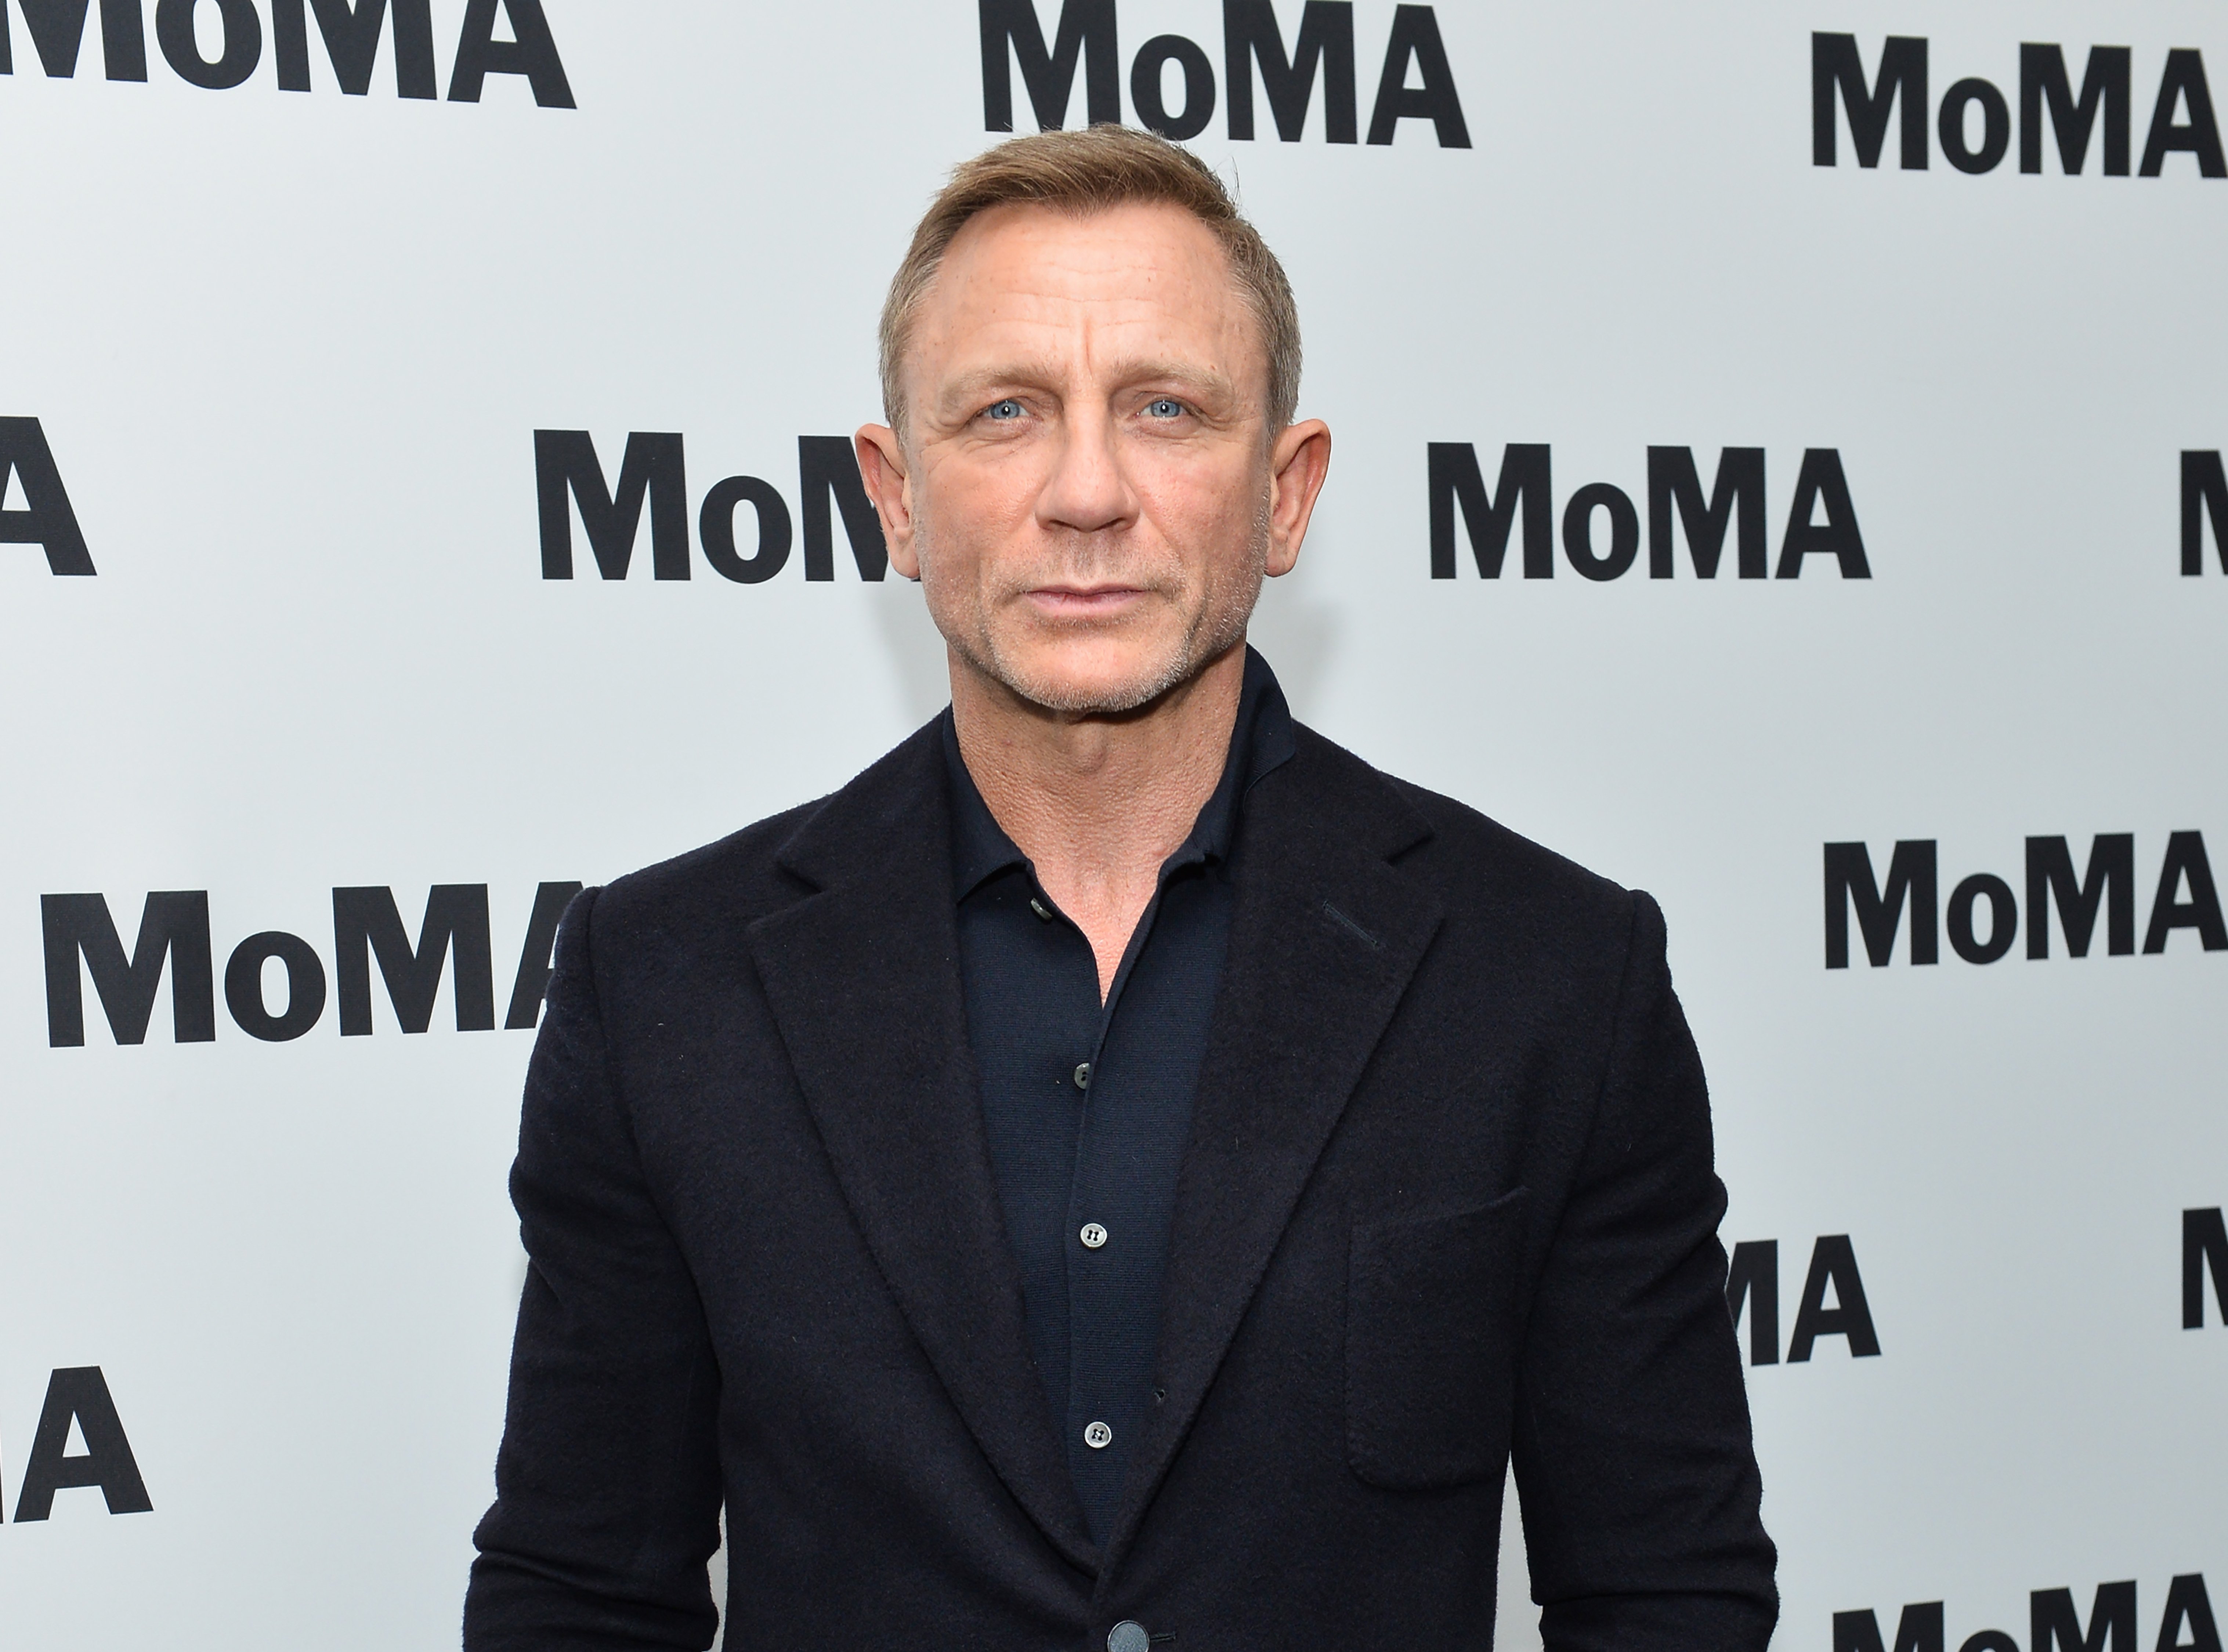 Daniel Craig during the MoMA's Film Series "In Character: Daniel Craig" at Museum of Modern Art on March 03, 2020 in New York City. | Source: Getty Images